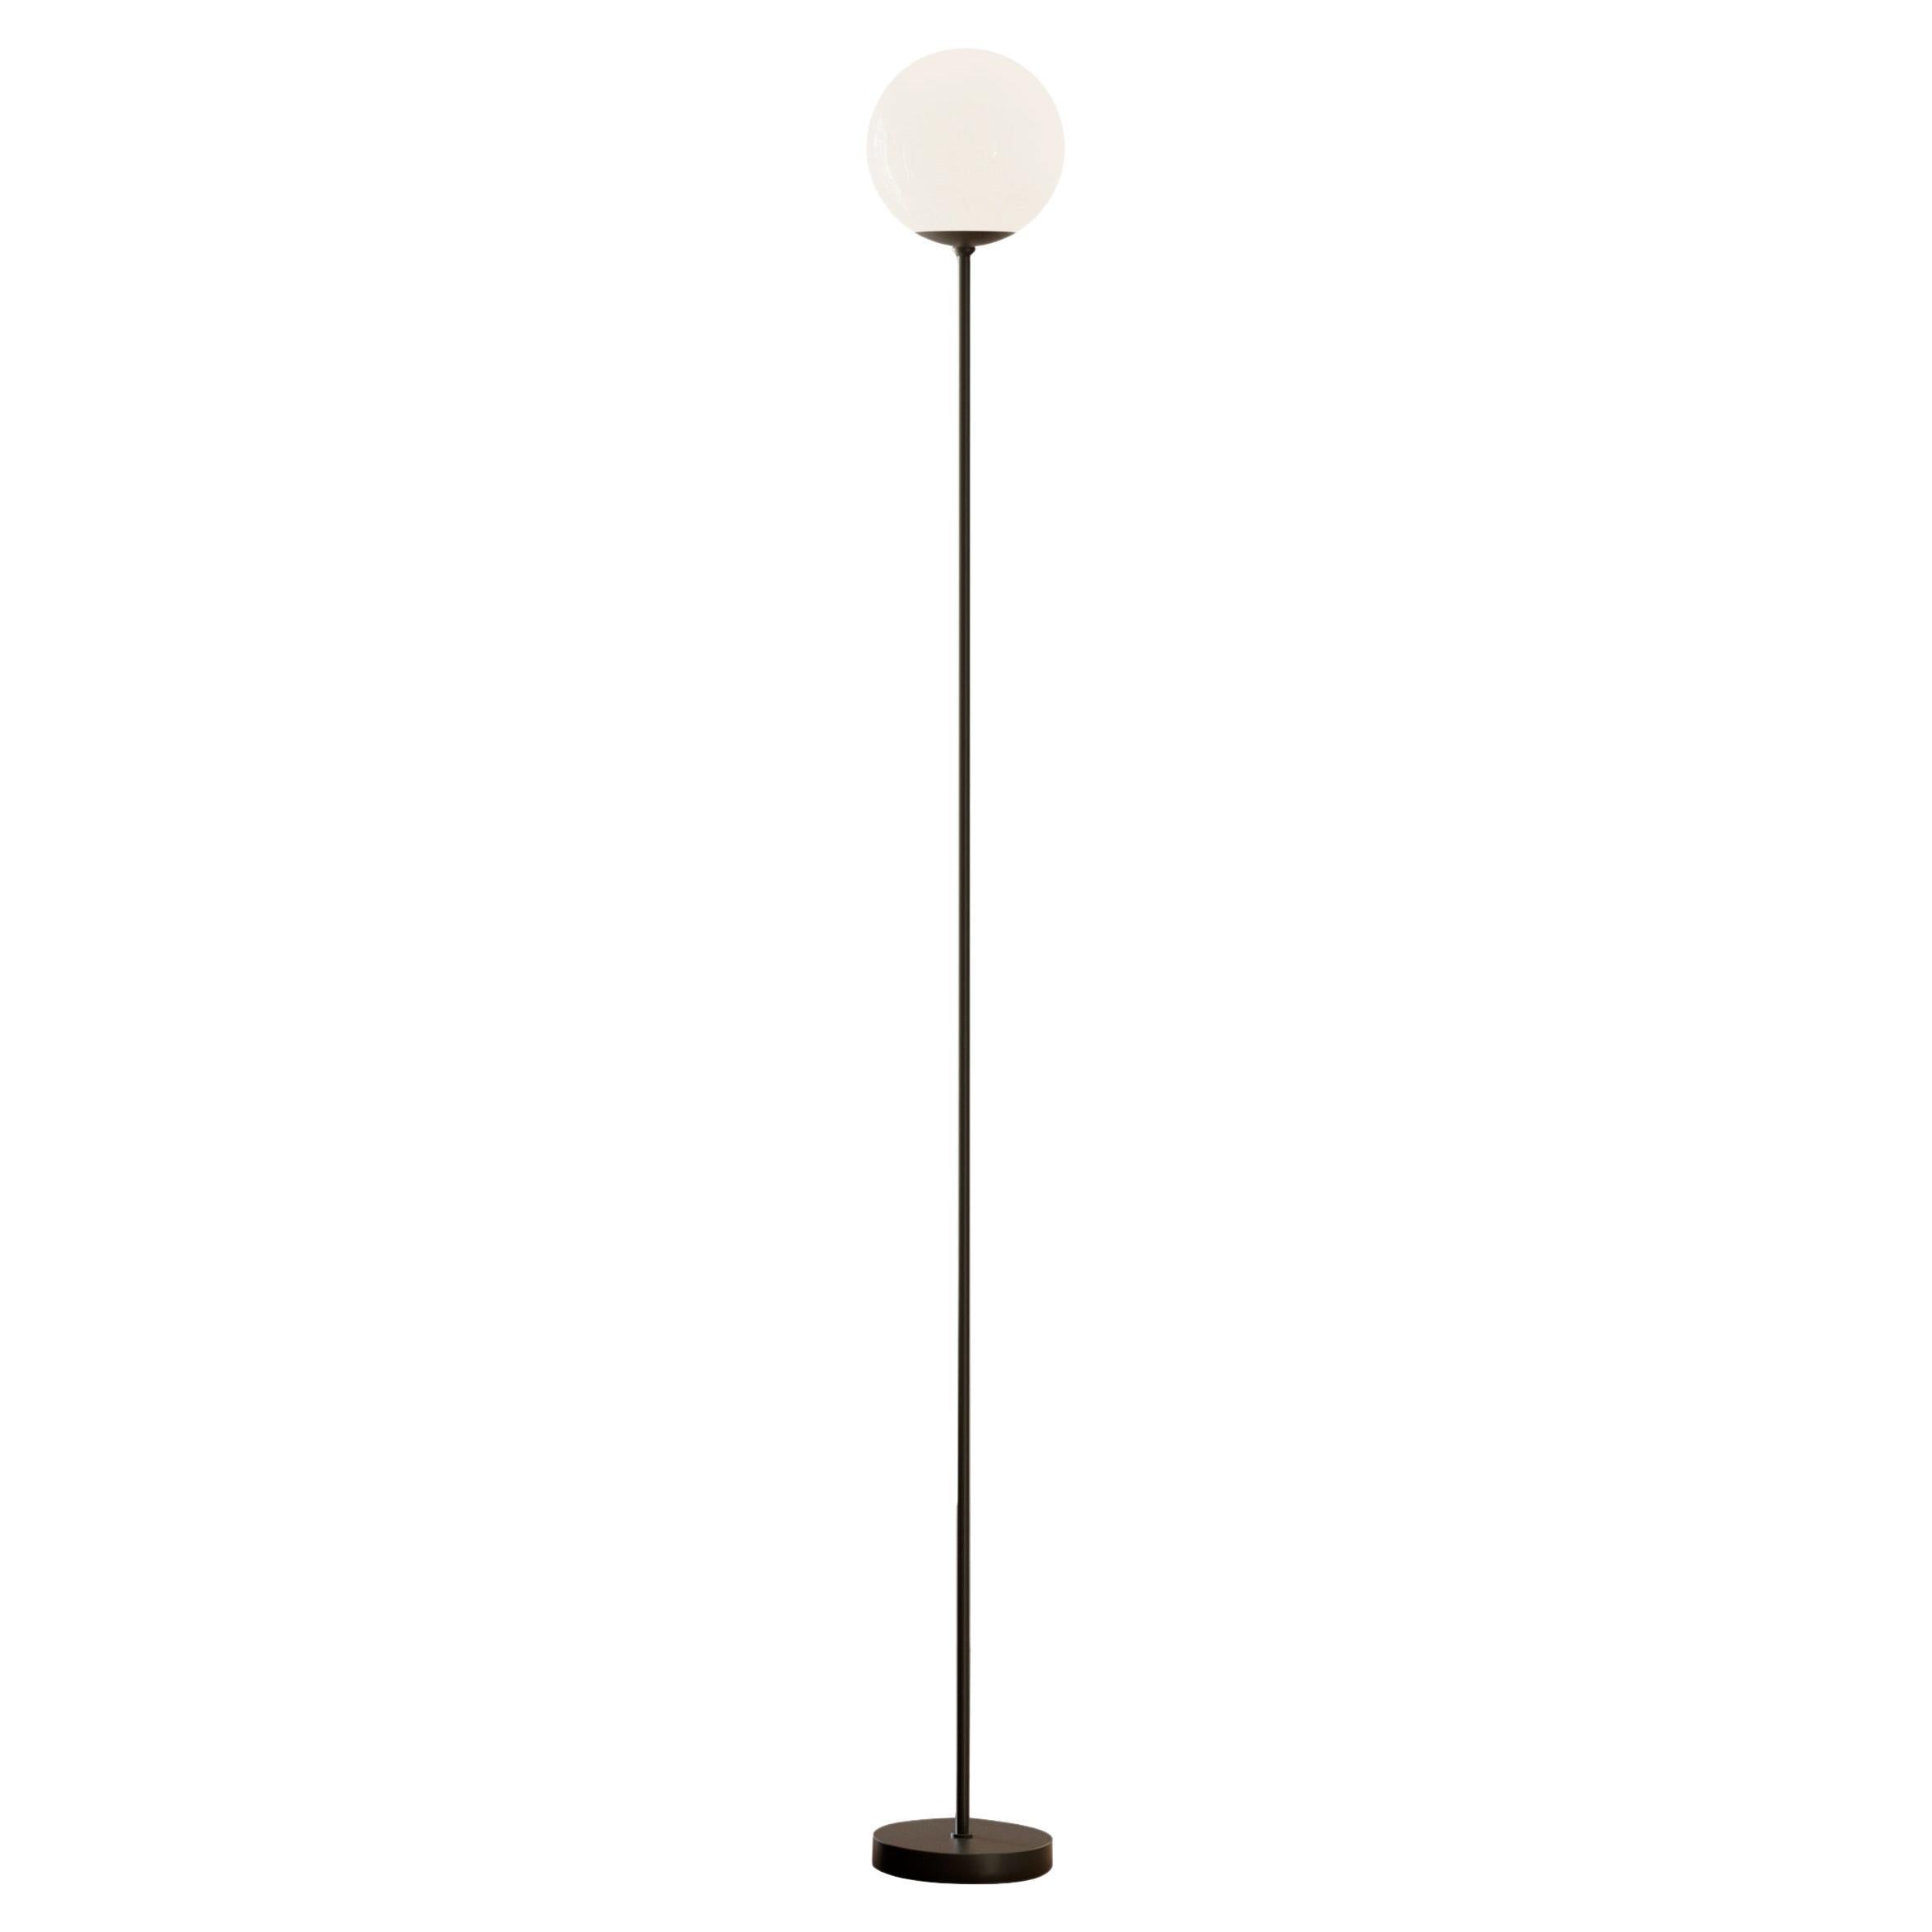 Large Gino Sarfatti Model 1081 Floor Lamp for Astep For Sale